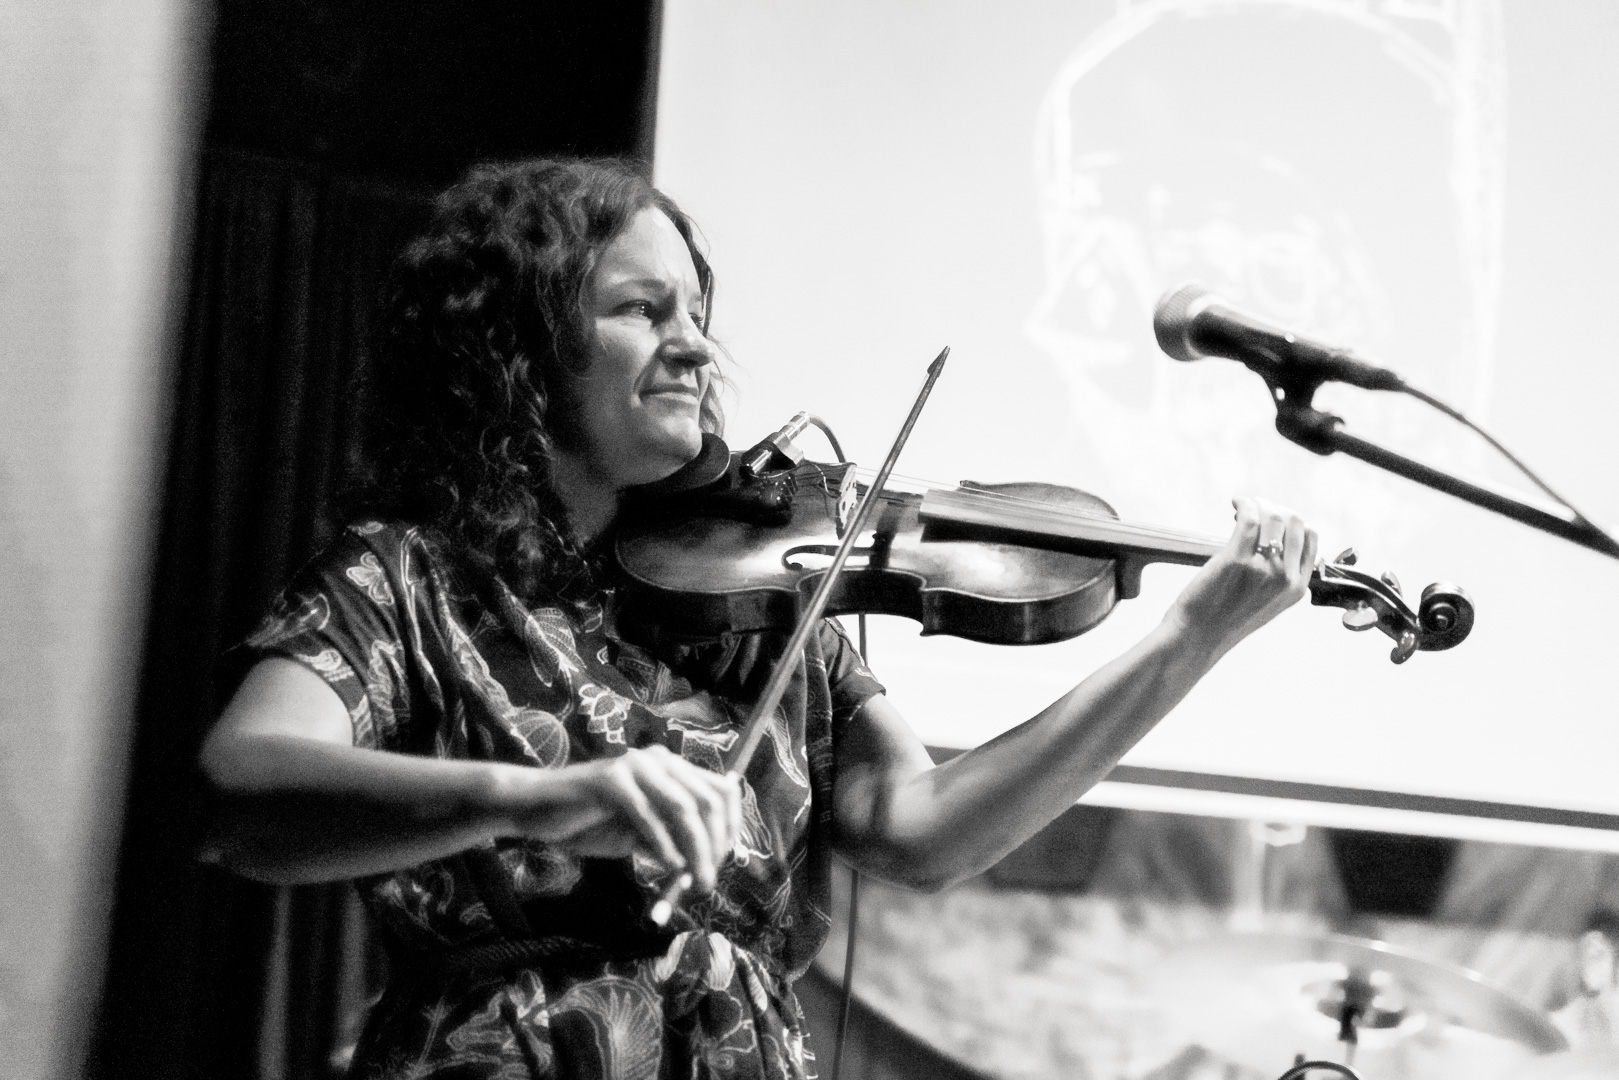 A woman plays violin (black and white photo)